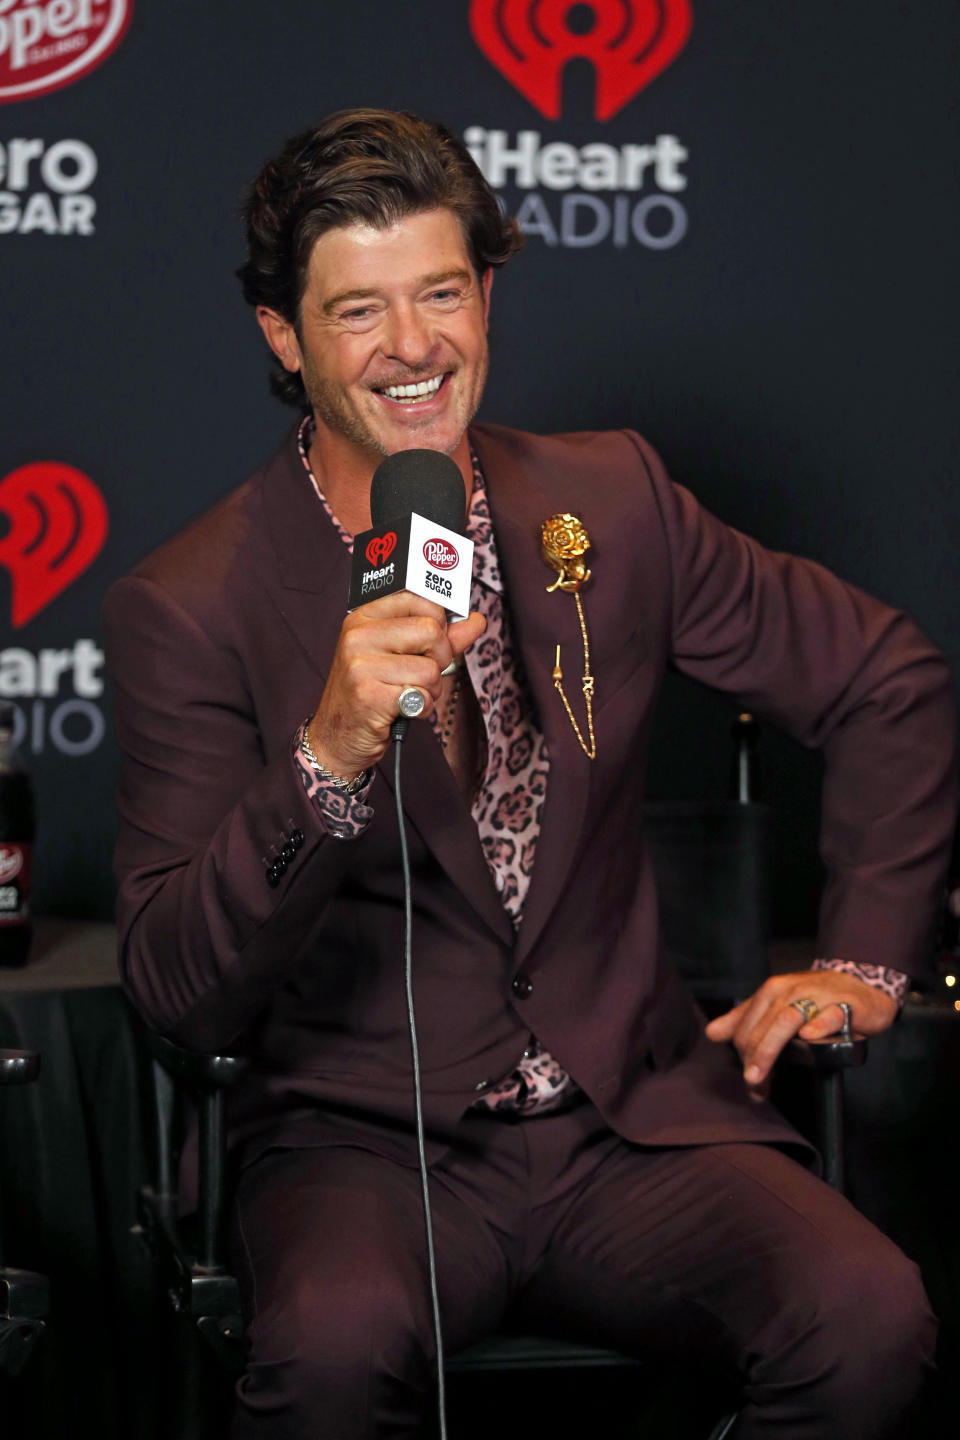 Thicke sitting and holding a mic, smiling